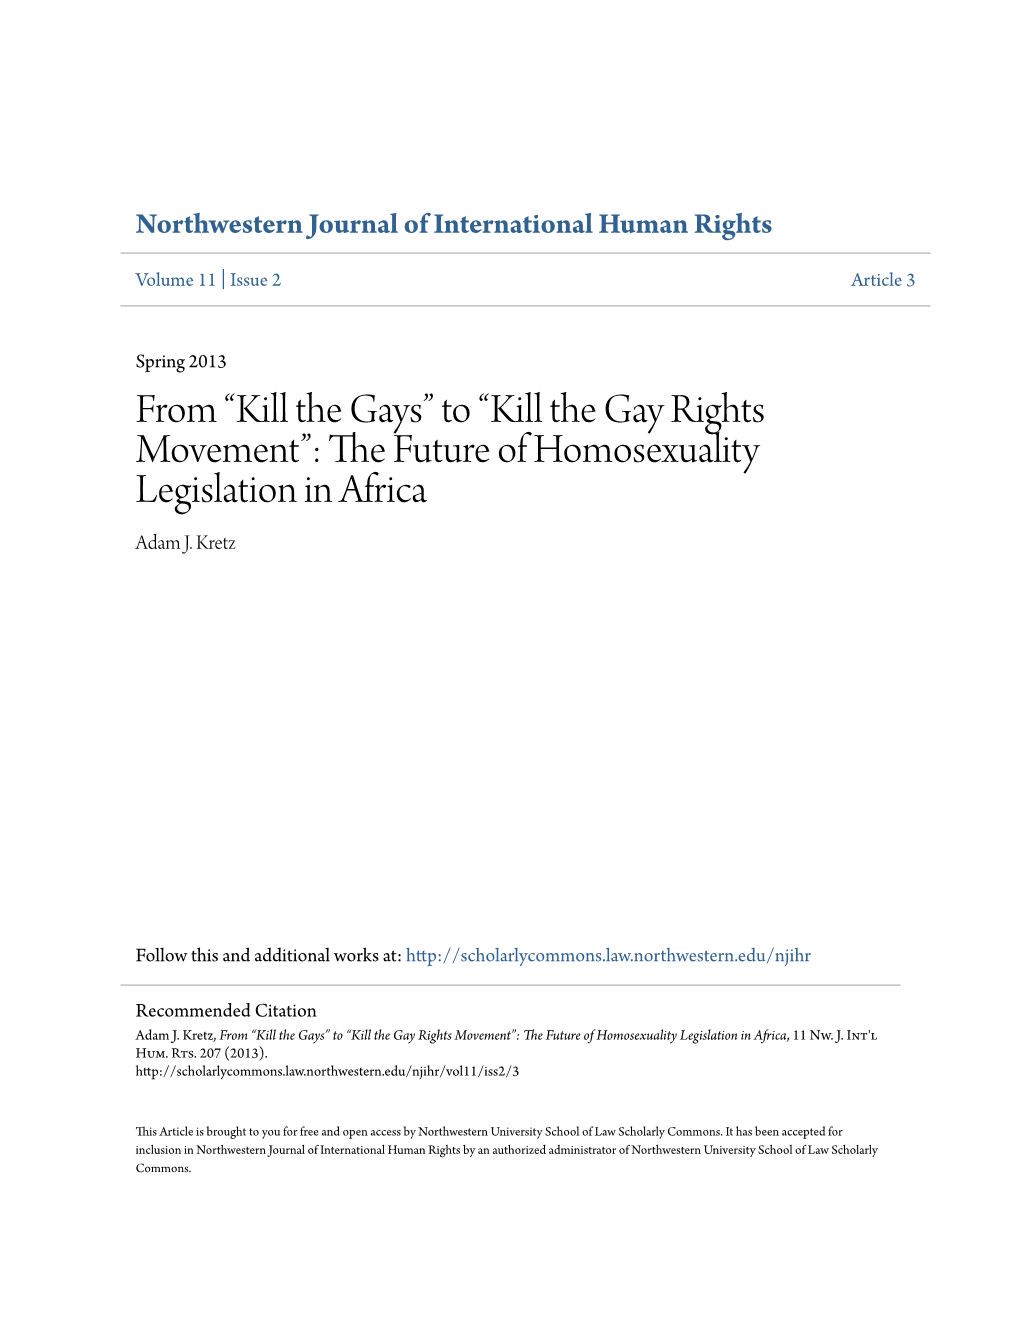 To “Kill the Gay Rights Movement”: the Future of Homosexuality Legislation in Africa, 11 Nw